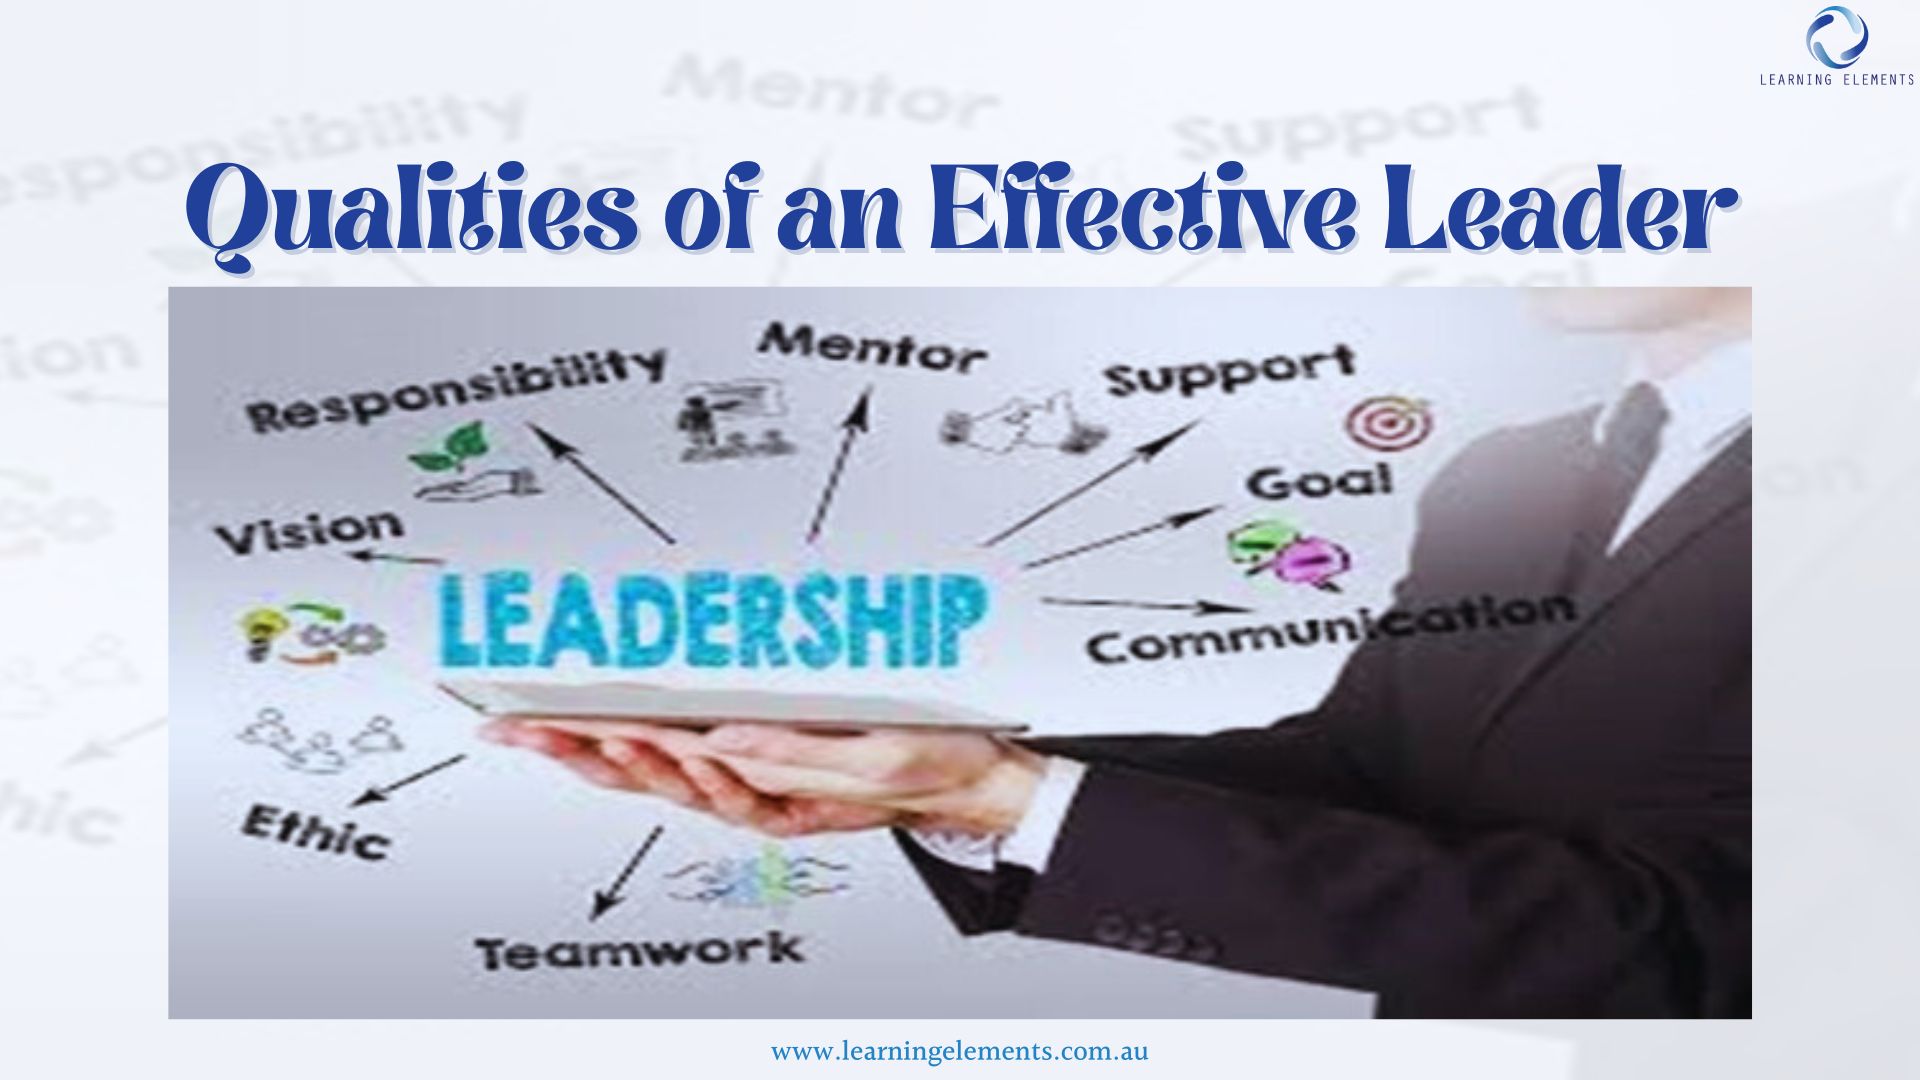 Qualities of an Effective Leader - Mastering the Art of Delegation, Communication, and Active Listening